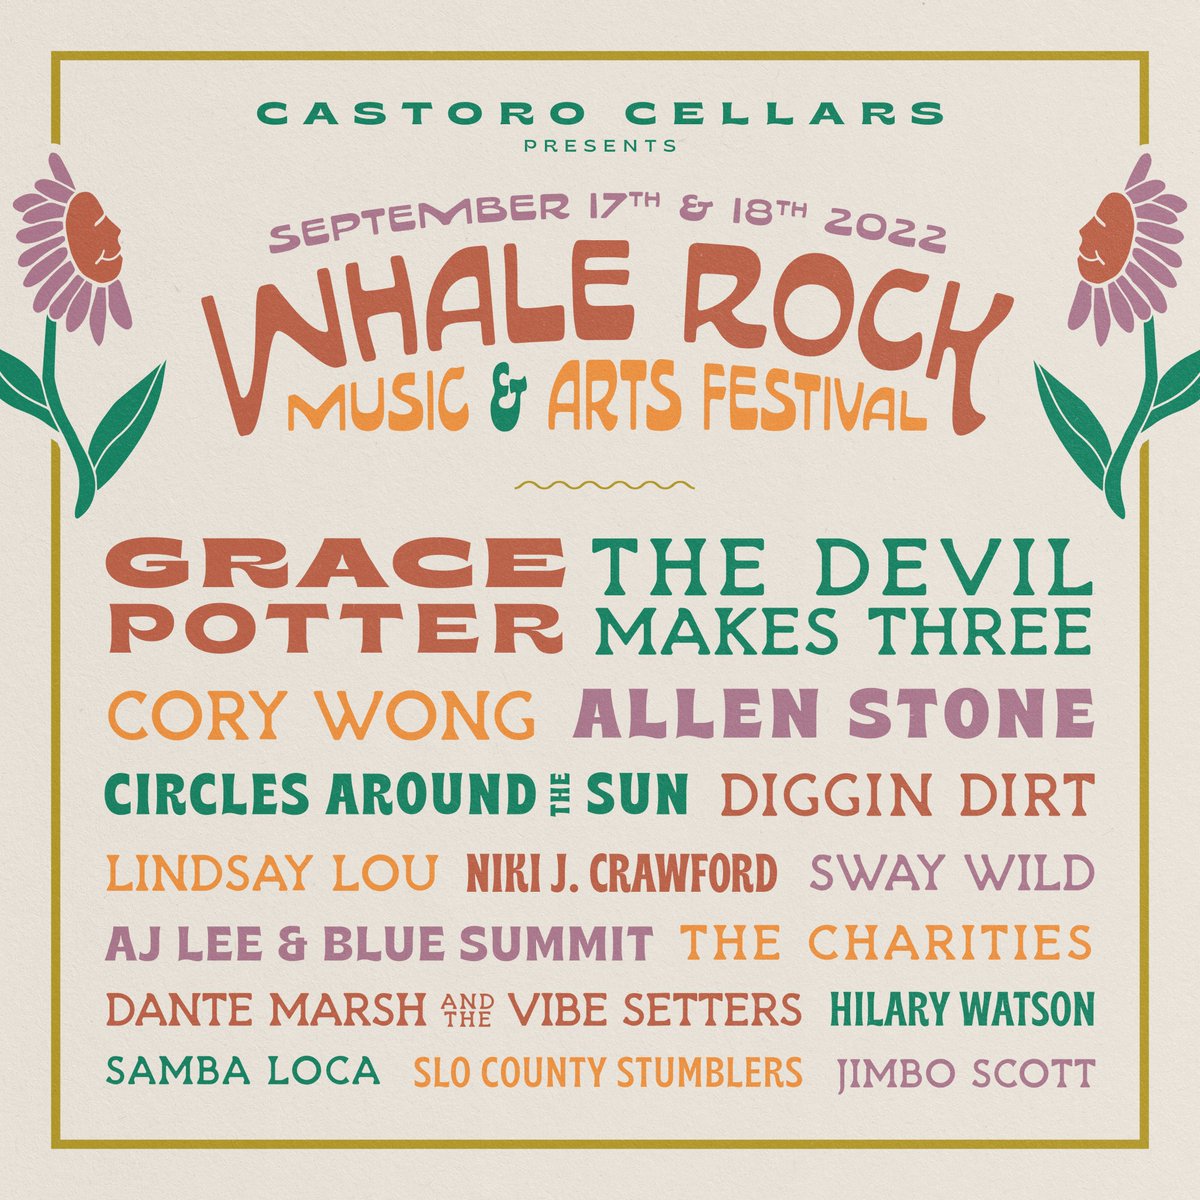 It’s almost time for the #WhaleRockMusicFestival at @castorocellars winery! Make sure to get your tickets now, and I’ll see you there! #wrmf22 
whalerockmusicfestival.com/tickets